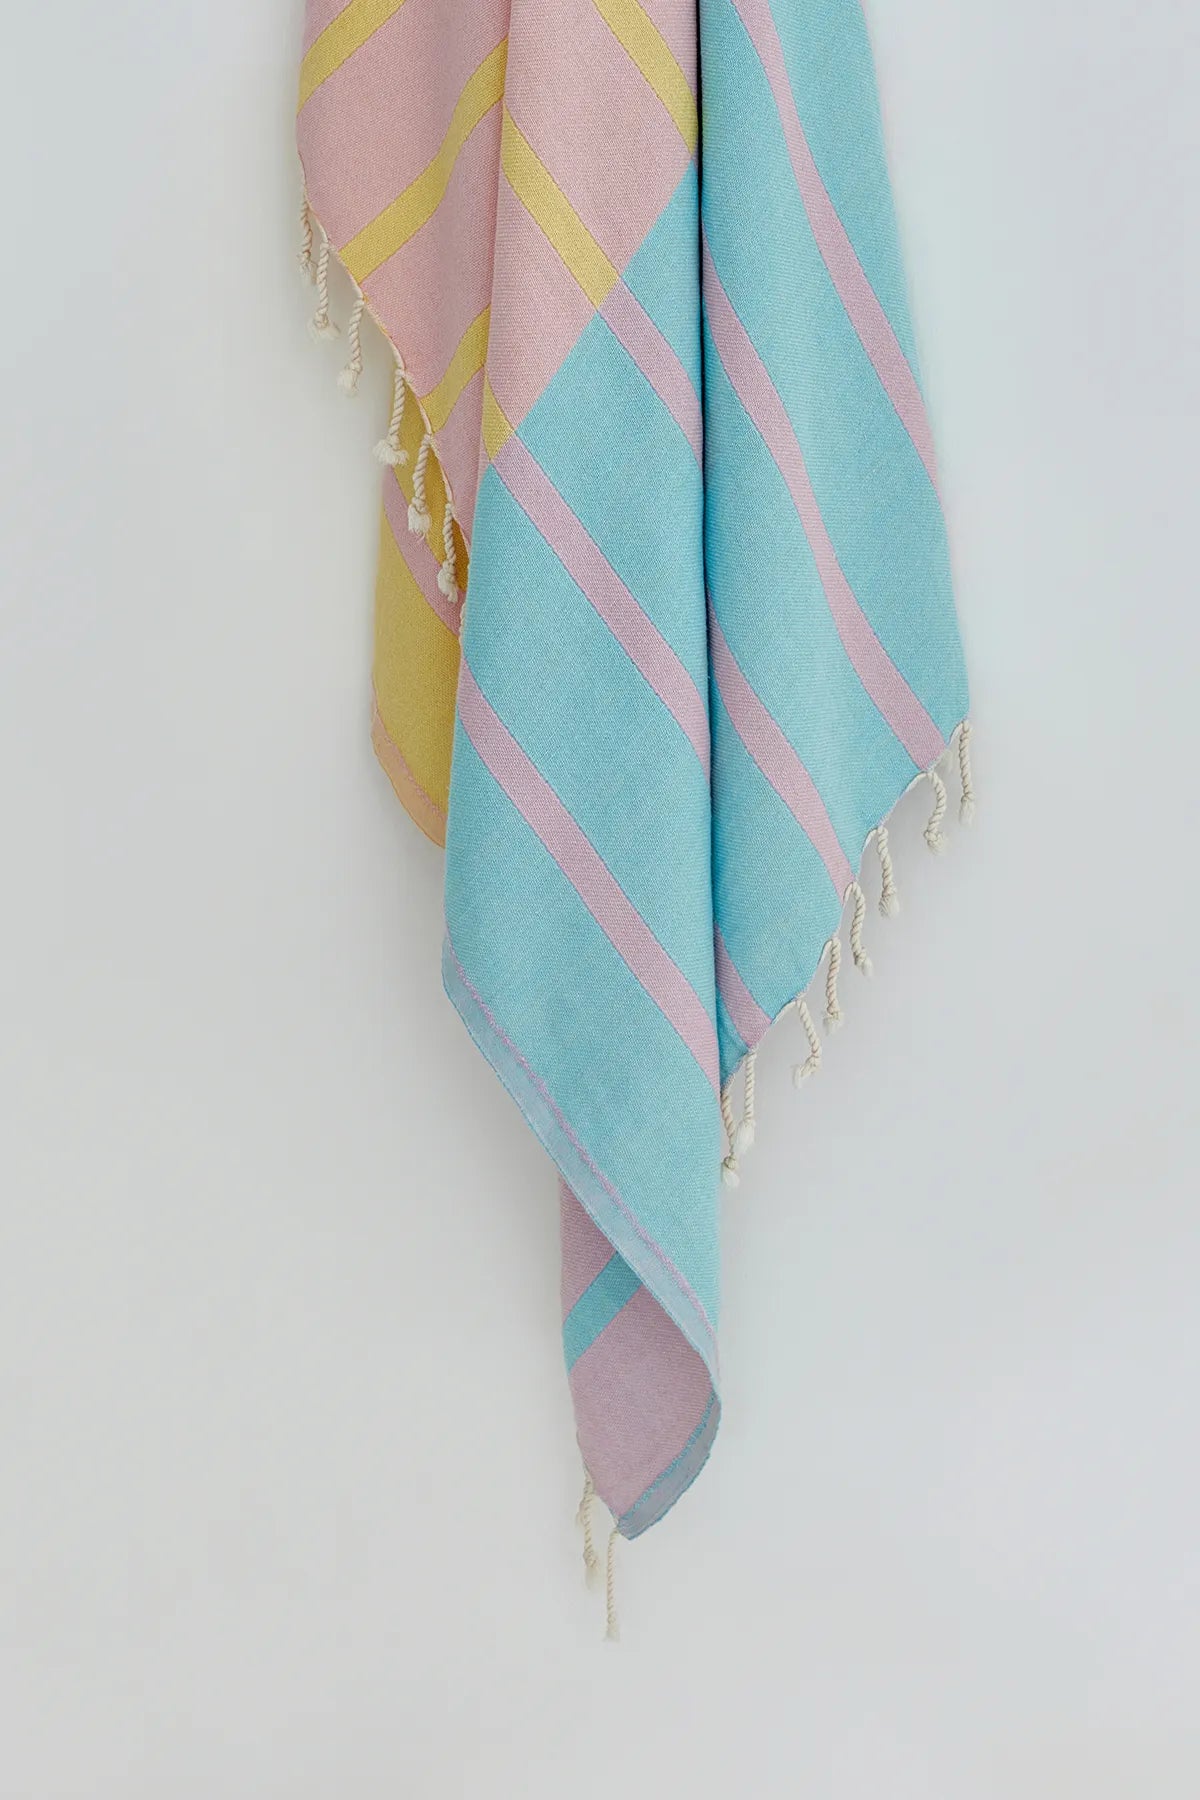 Beach/Bath,Pink-Blue,Turkish towel,detailed,summer,line patterned,double-faces,purified sand,light,compact, easy pack,fun, recycled, double color